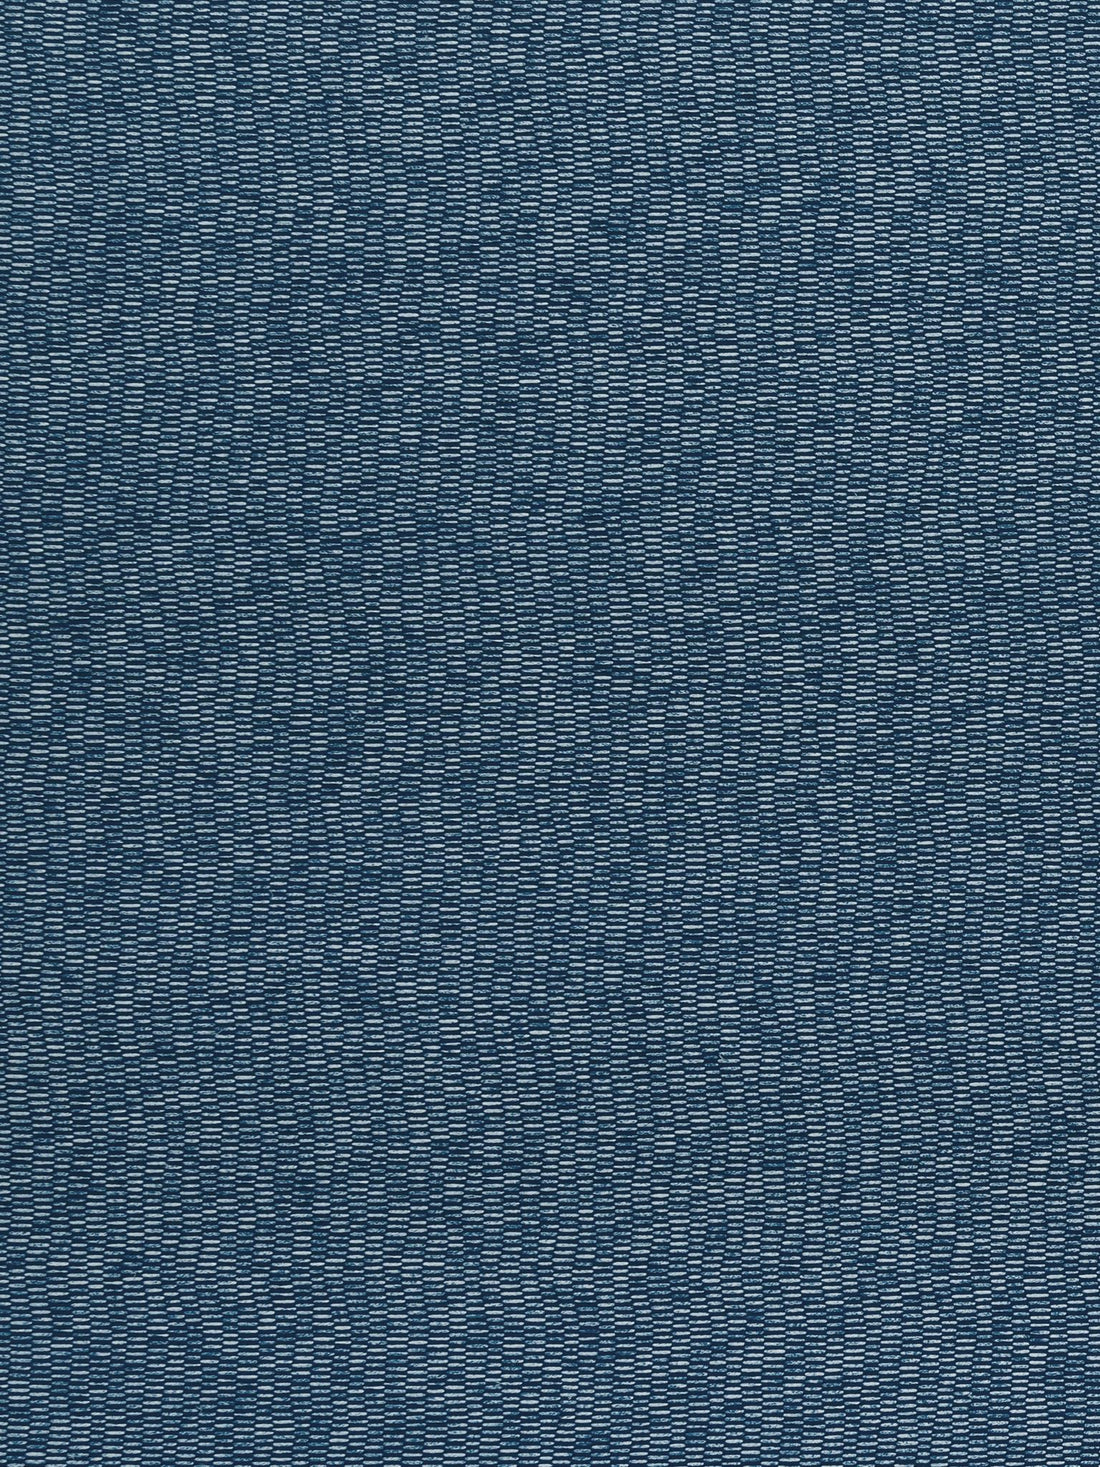 Raine Weave fabric in deep sea color - pattern number GW 000327224 - by Scalamandre in the Grey Watkins collection